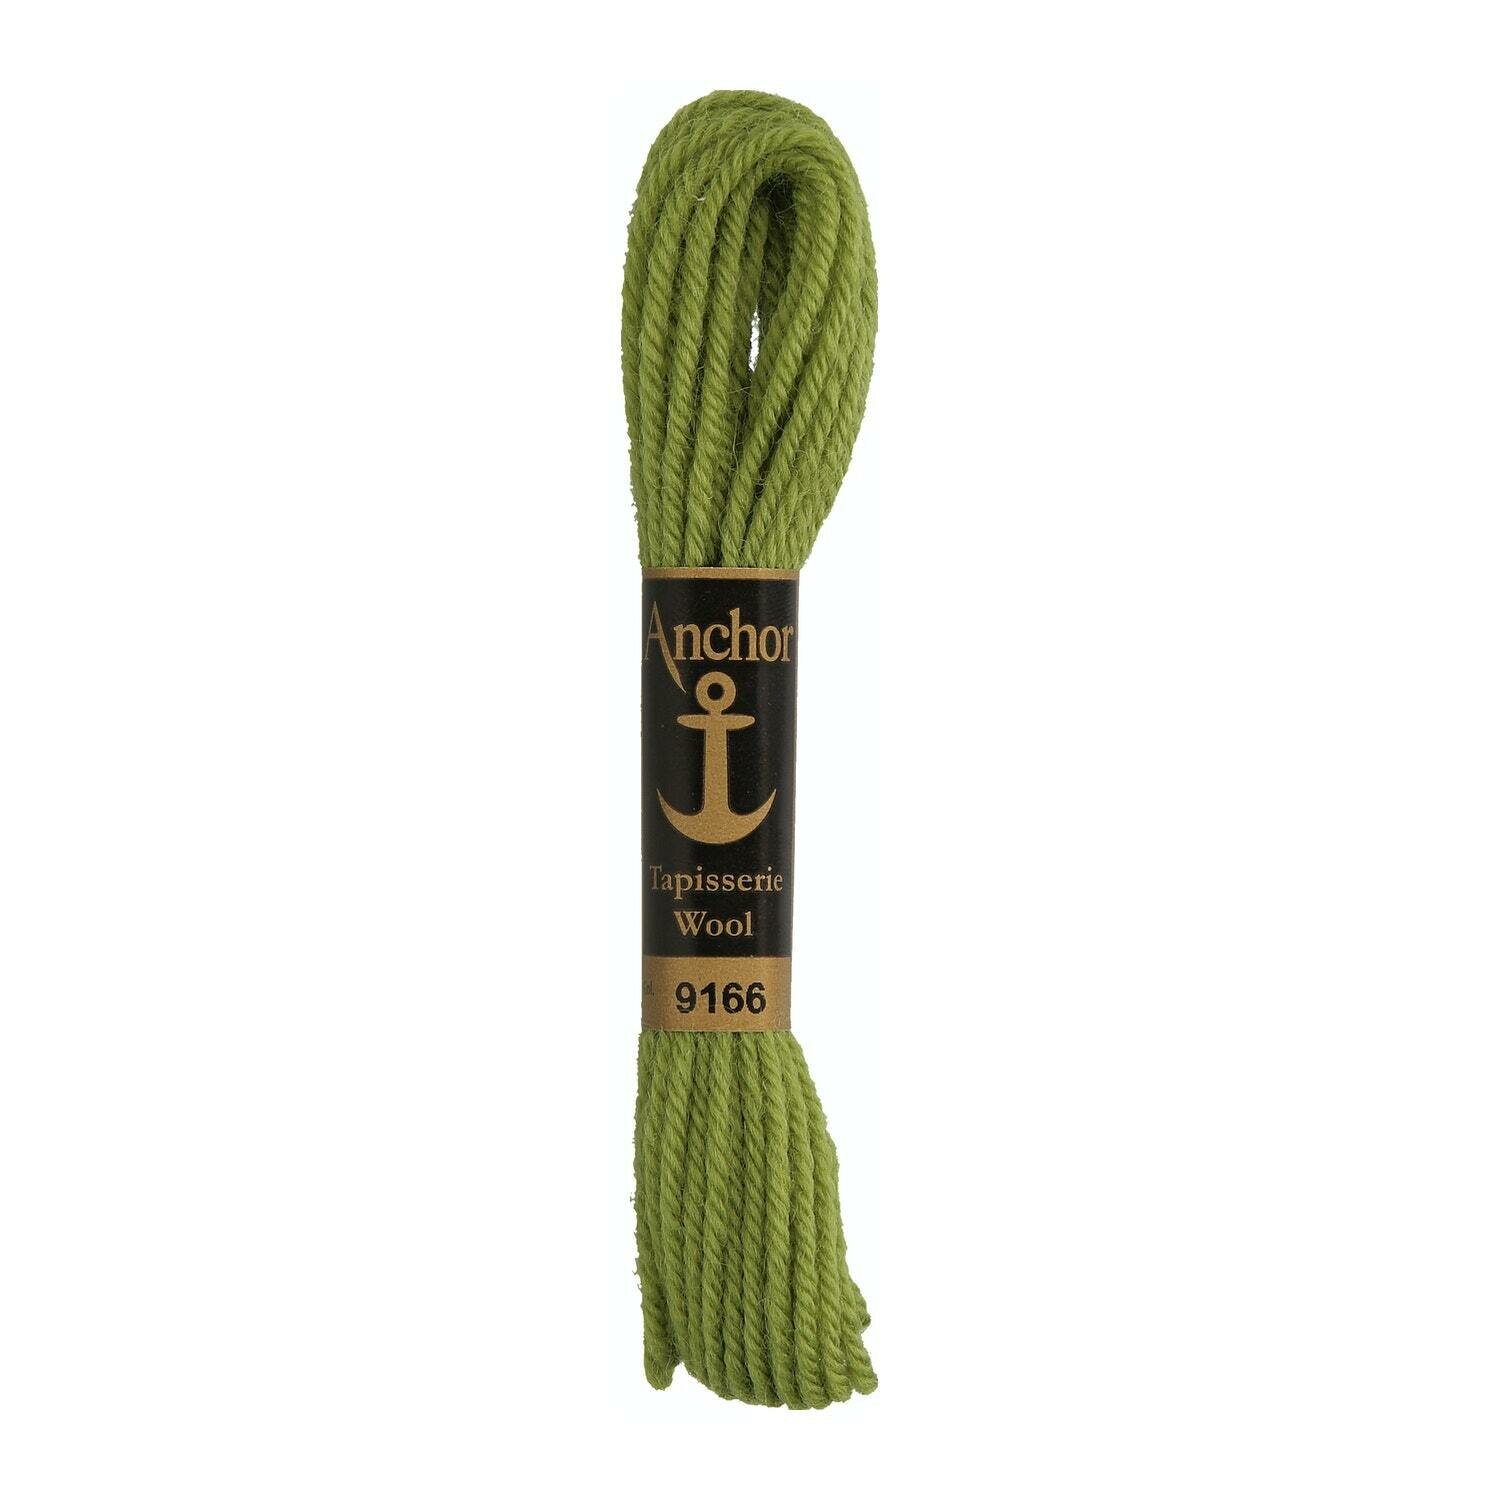 Anchor Tapisserie Wool # 09166